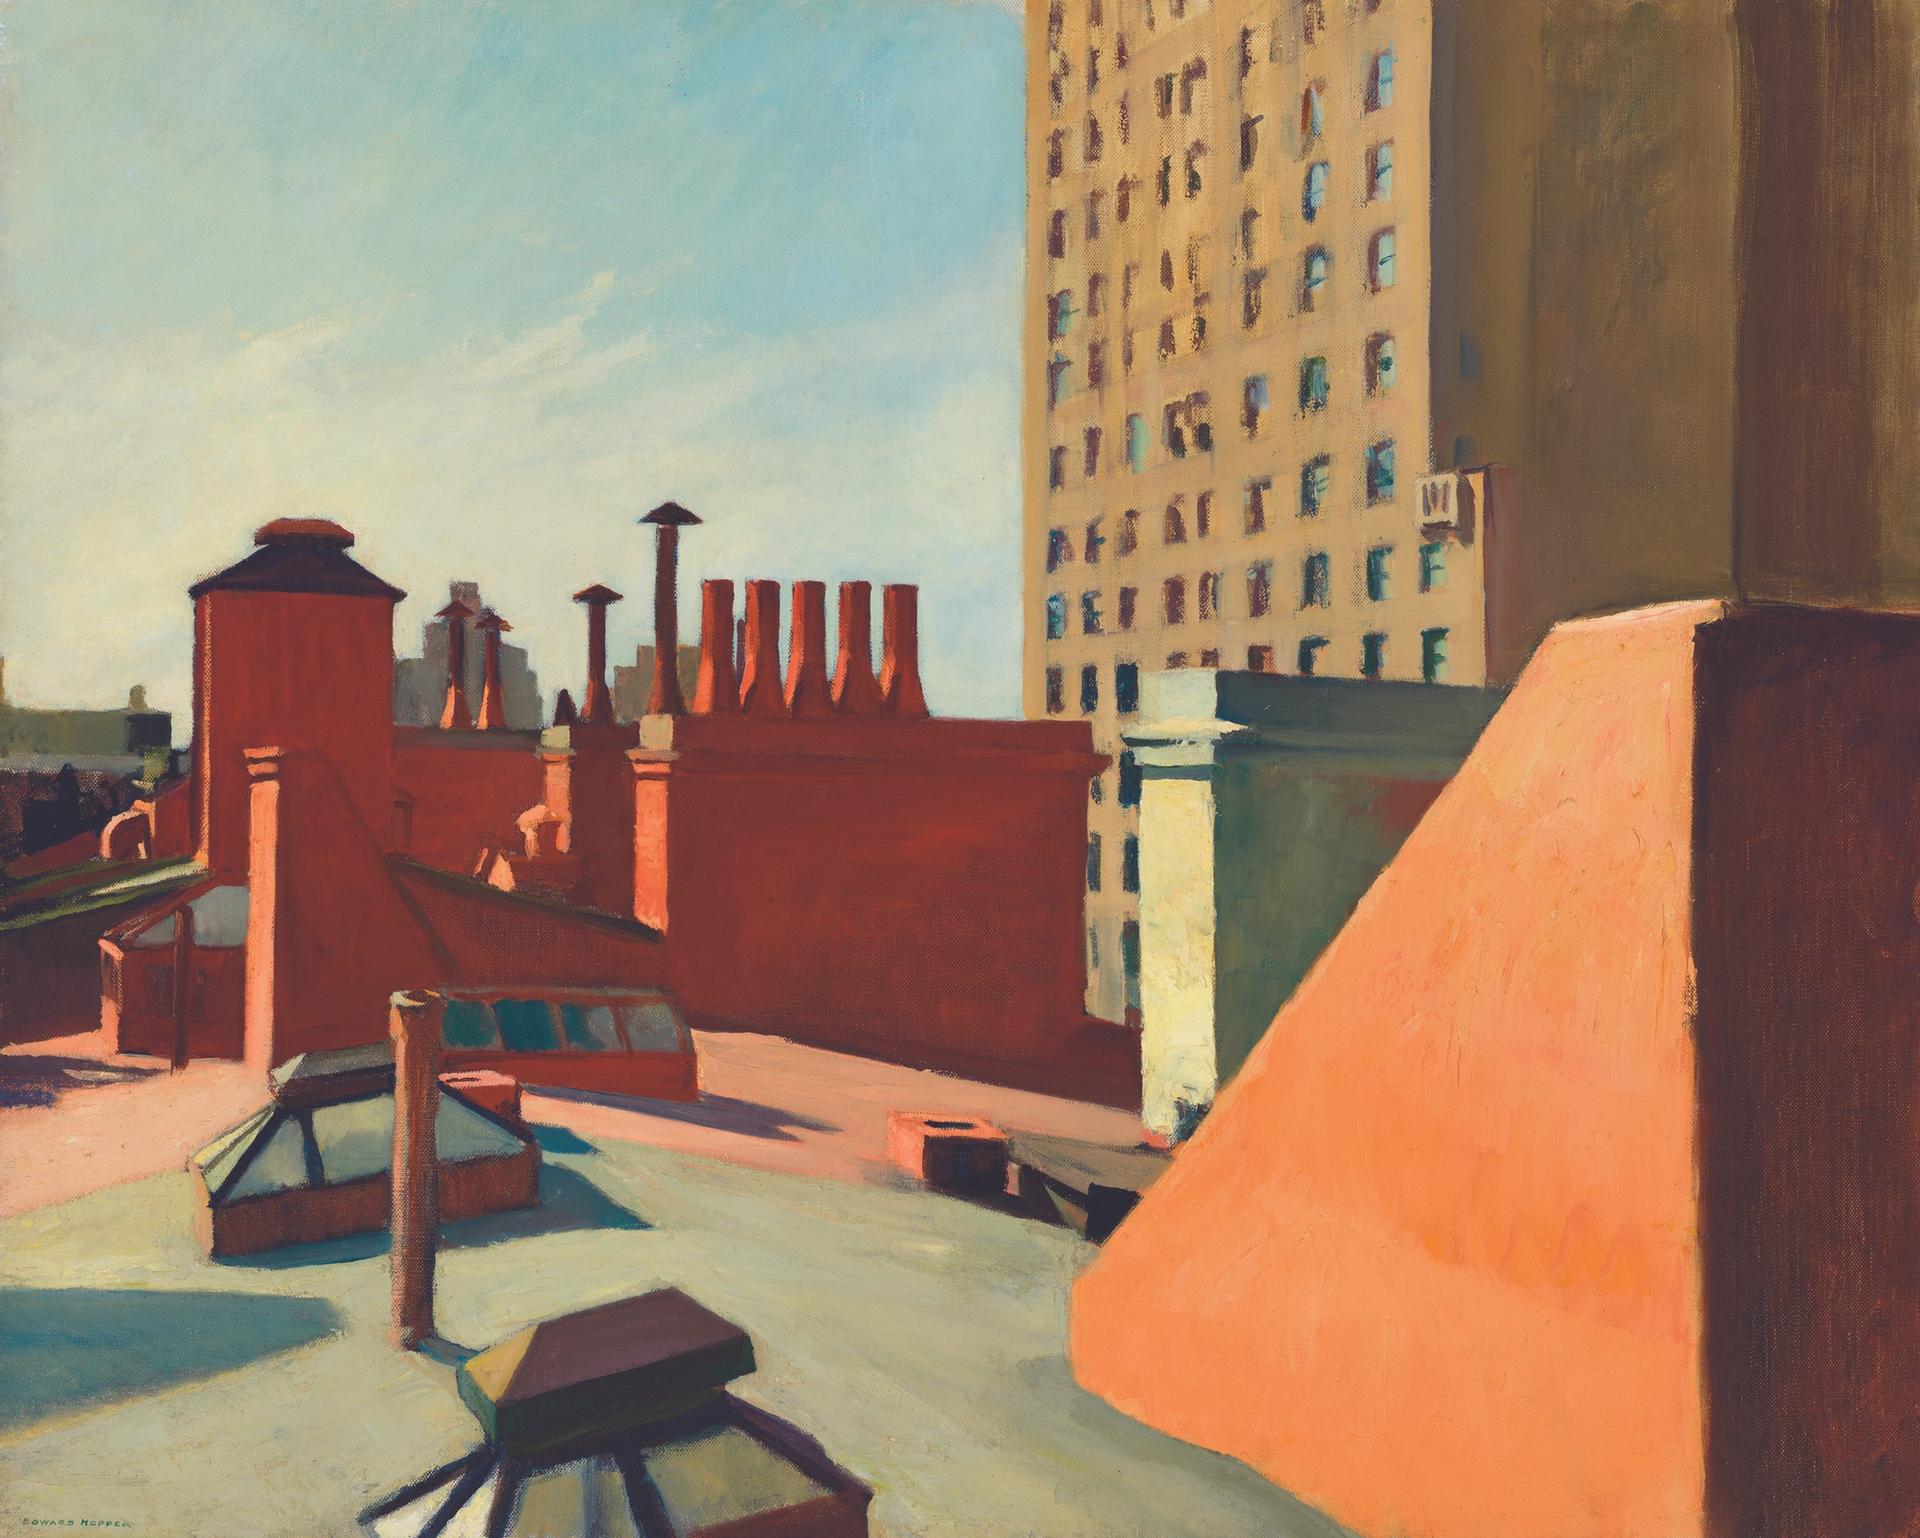 Edward Hopper’s City Roofs (1932), one of the artist’s many paintings that reveal another side to New York. The Whitney Museum of American Art’s exhibition includes a large number of his best known urban paintings alongside rarely seen works and personal ephemera

Digital Image © Whitney Museum of American Art

